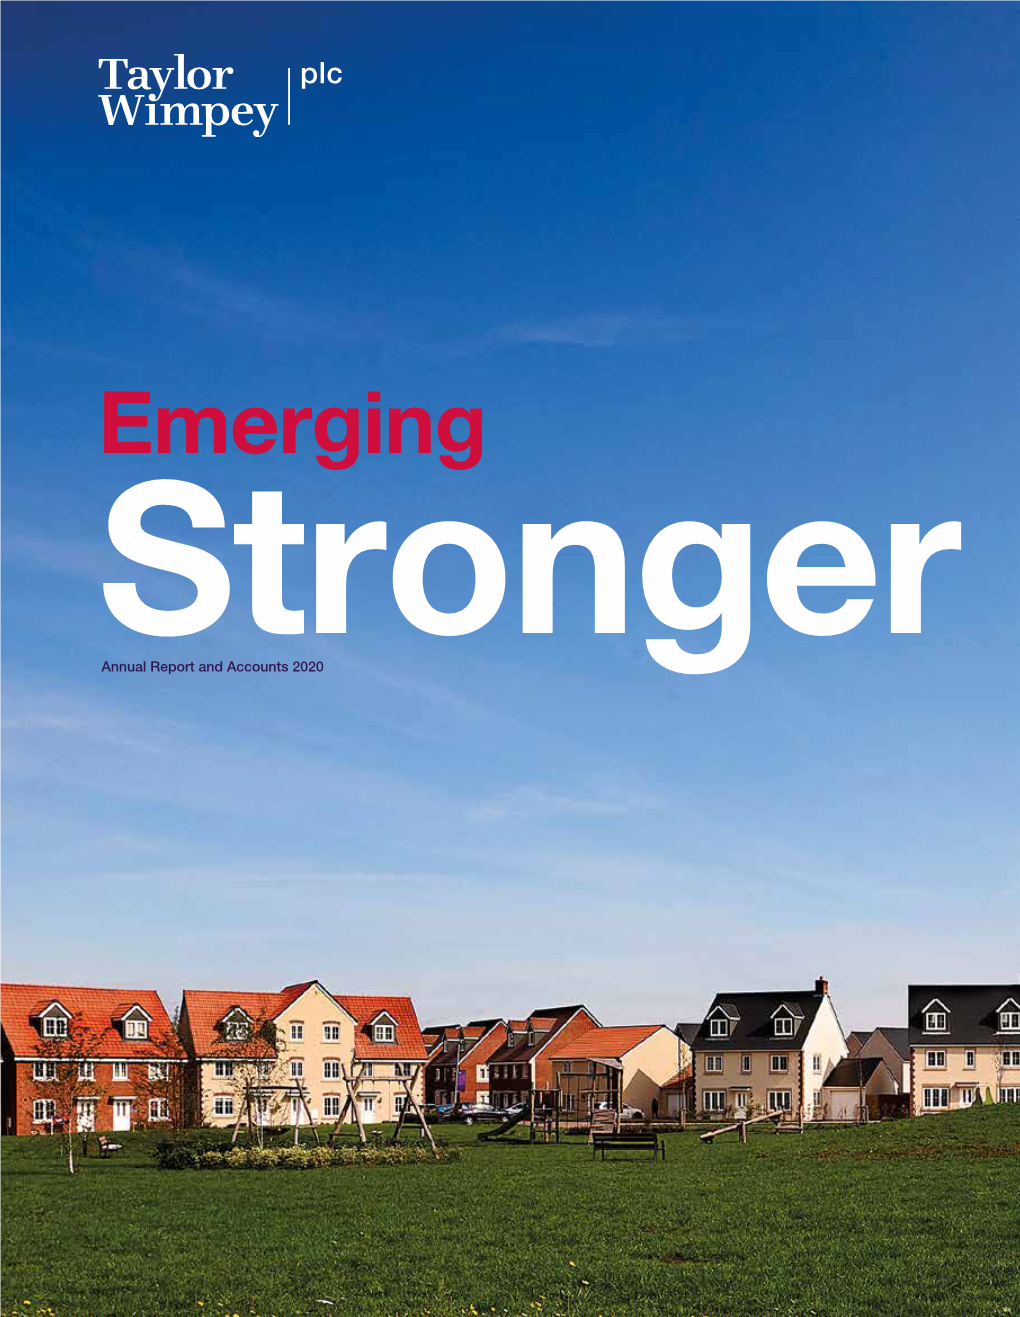 Taylor Wimpey Plc Annual Report and Accounts 2020